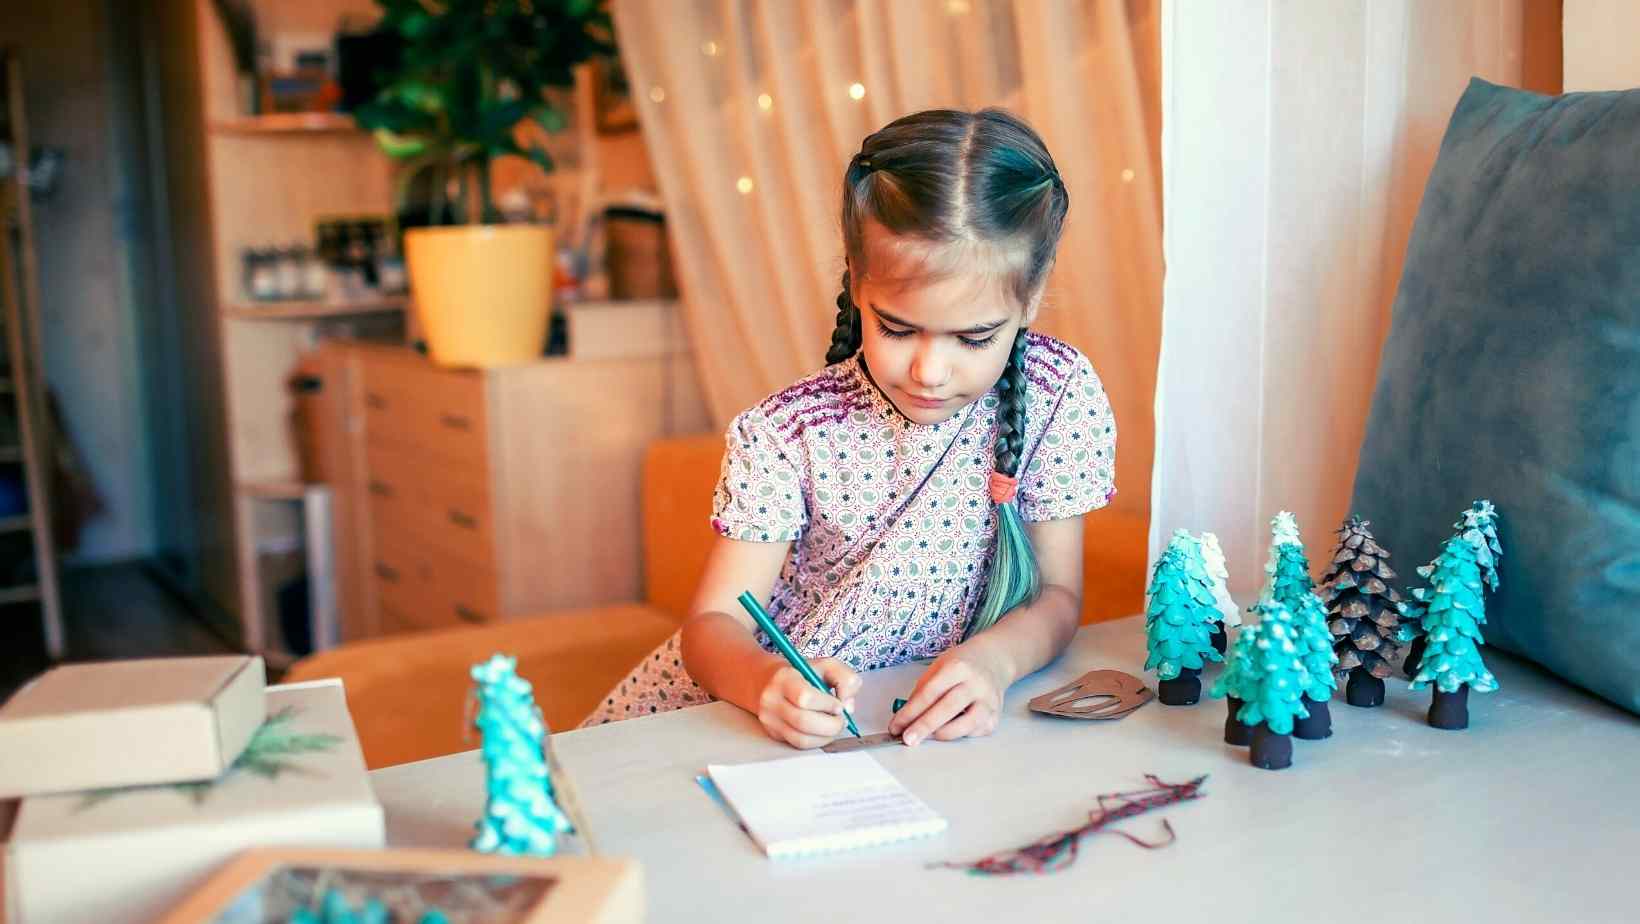 Easy DIY Ideas for Your Kids to Make At Home without Tons of Art Supplies